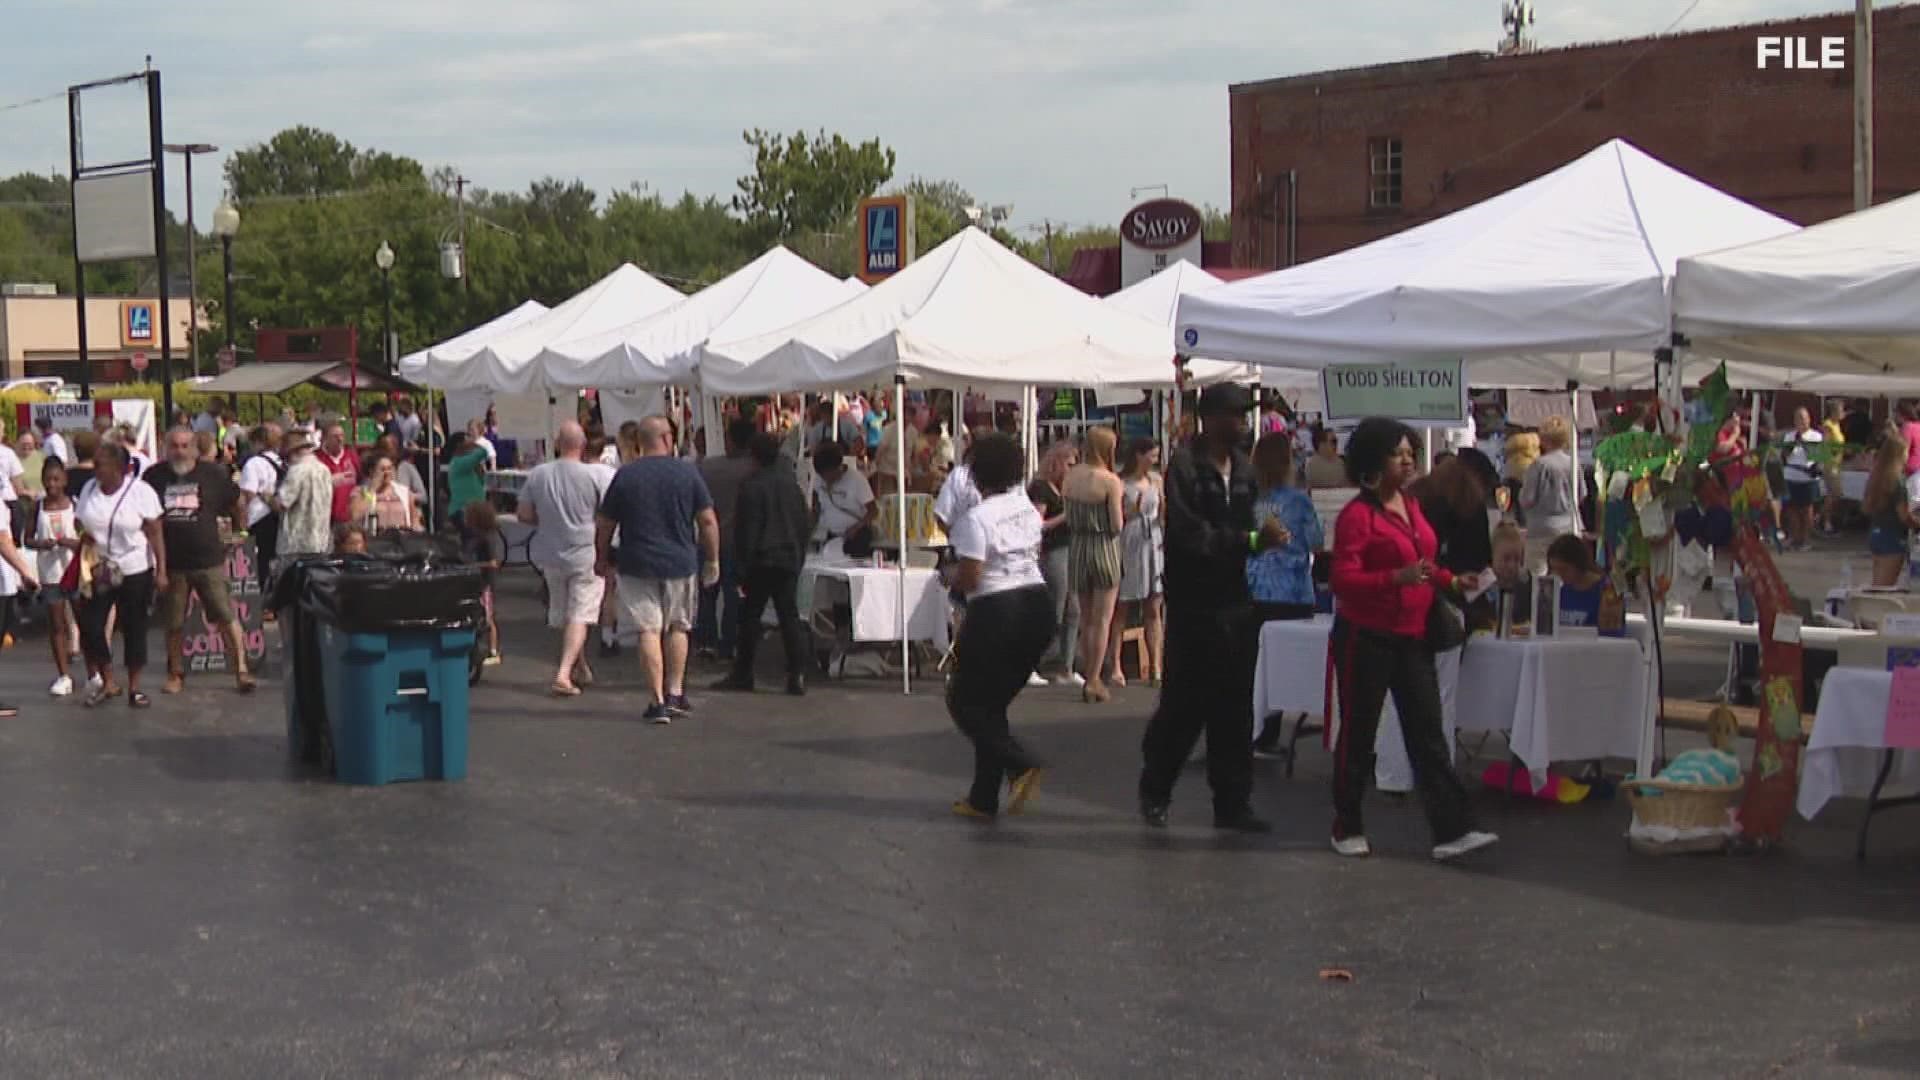 Taste in Ferguson is back Sunday from 11 a.m. to 3 p.m. at the Savoy Banquet Center. Tickets cost $35.